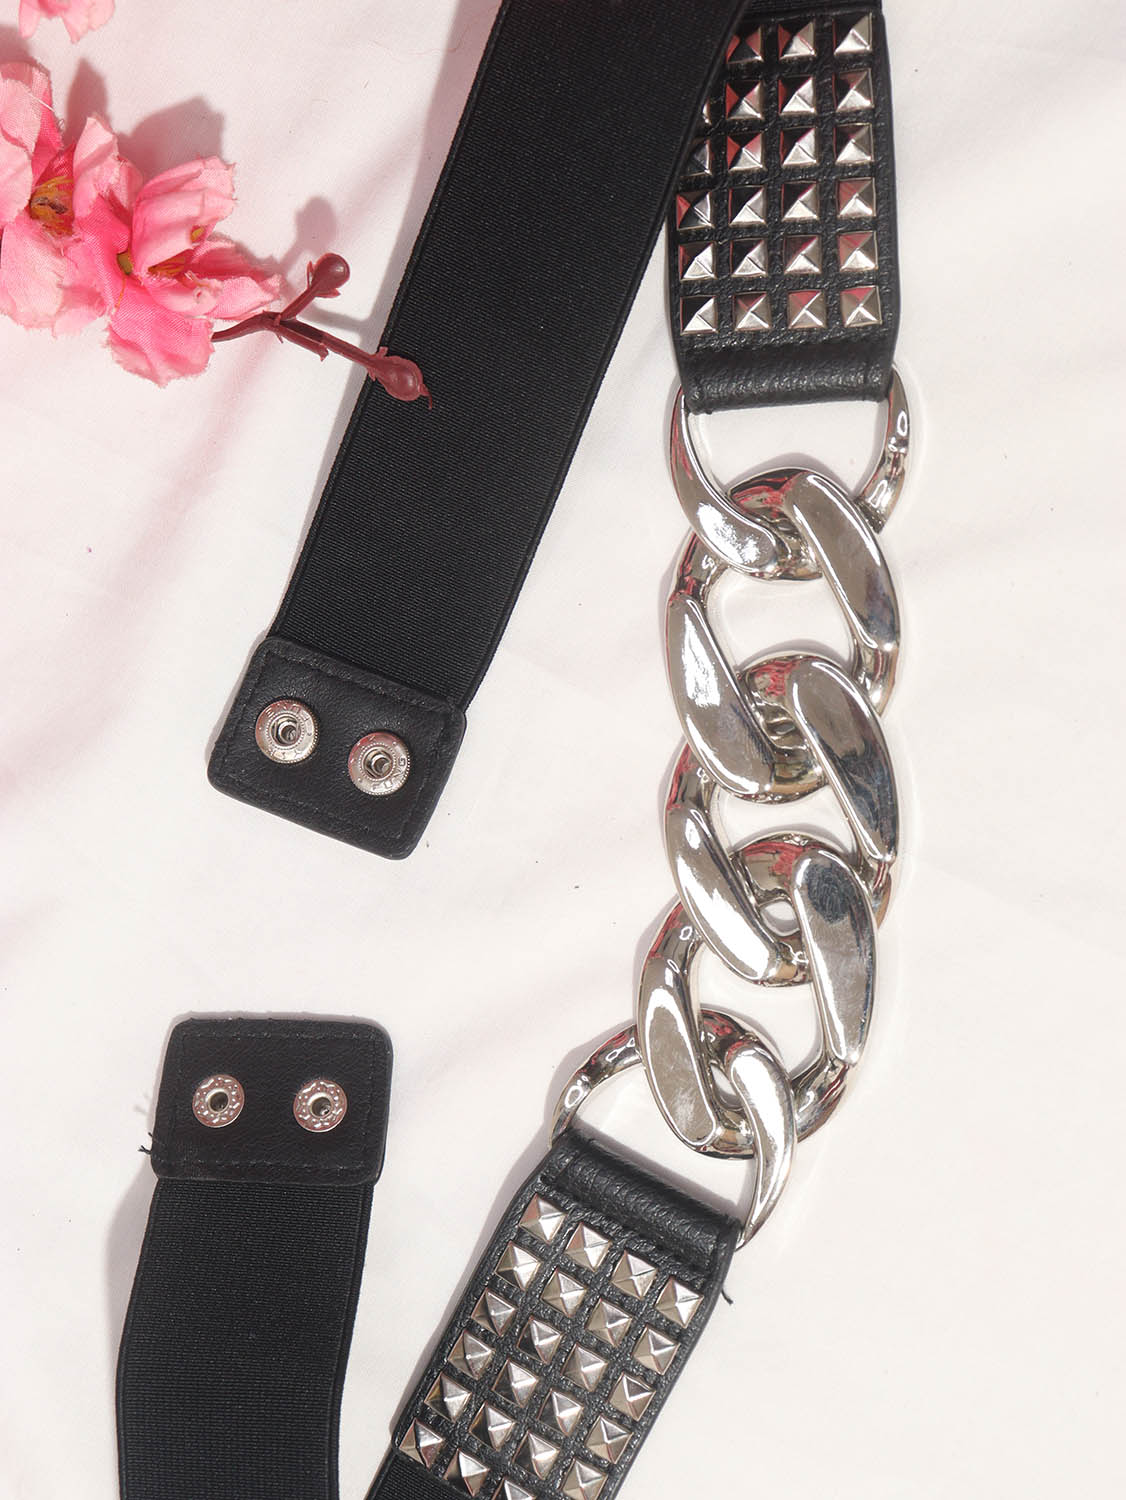 Exclusive Silver Belt Collection for Fashionable Occasions - Shine in Style - Luxurion World